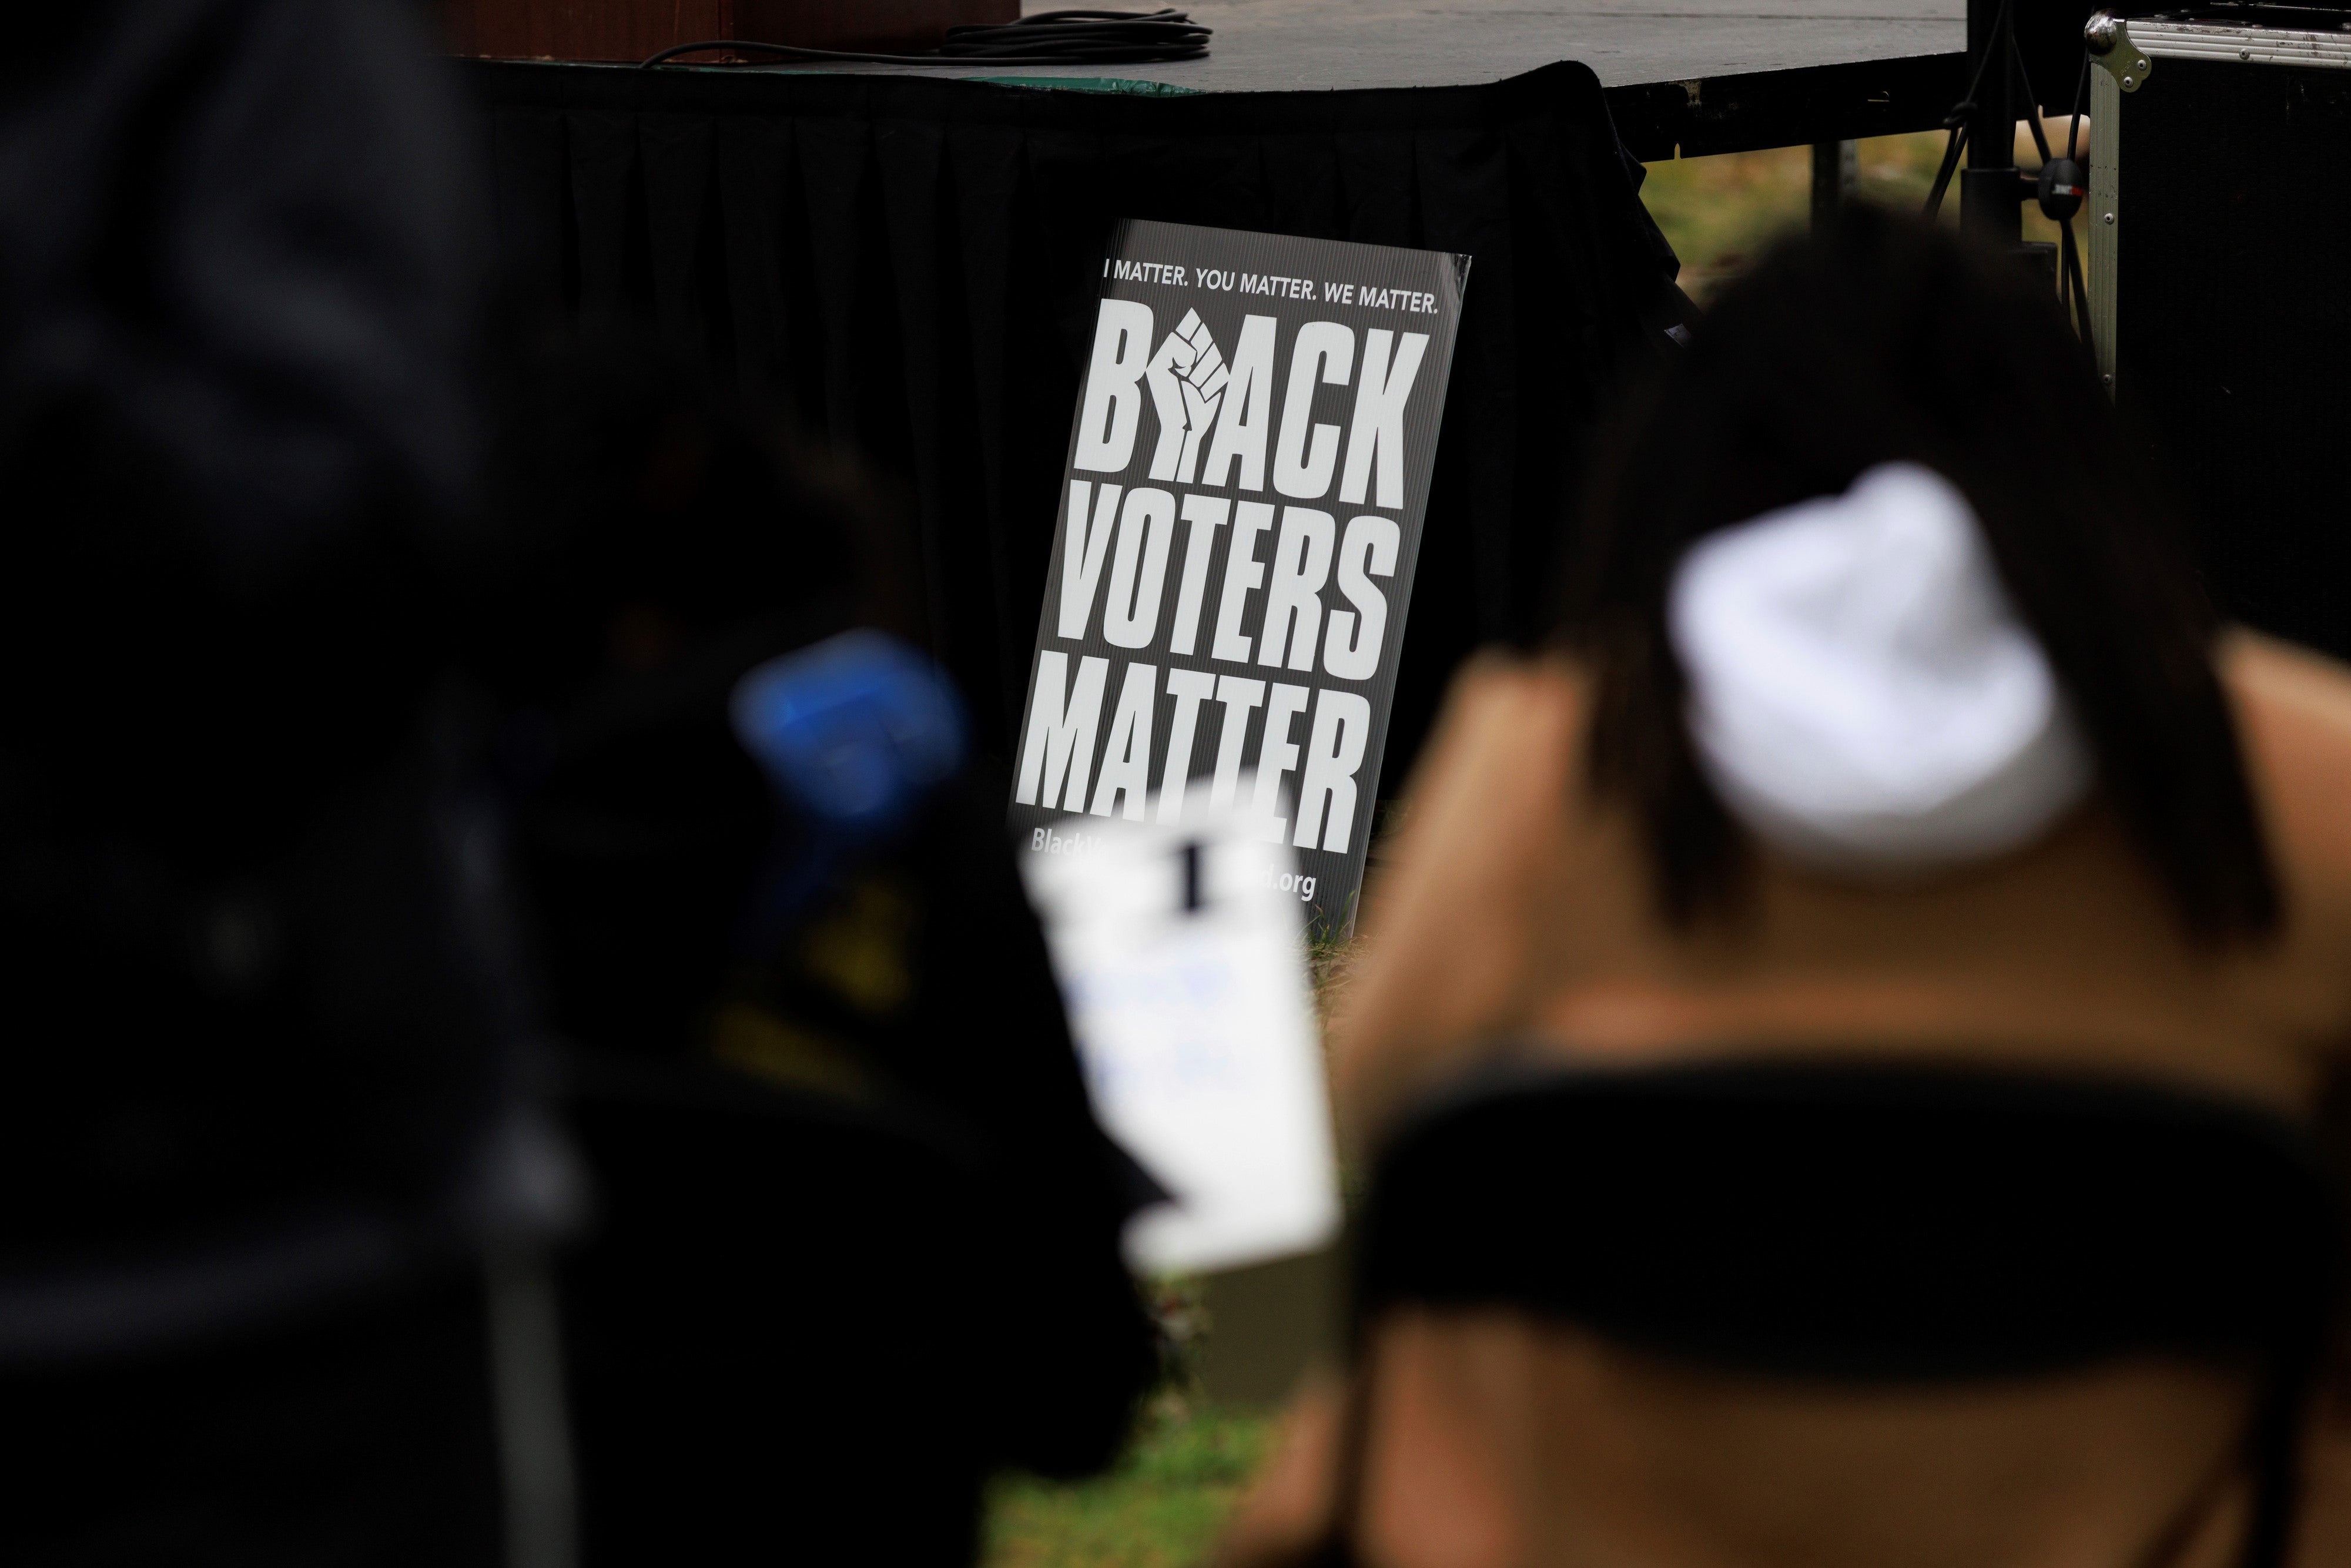 People attend a rally held by the Southern Poverty Law Center near the U.S. Capitol on October 4, 2022